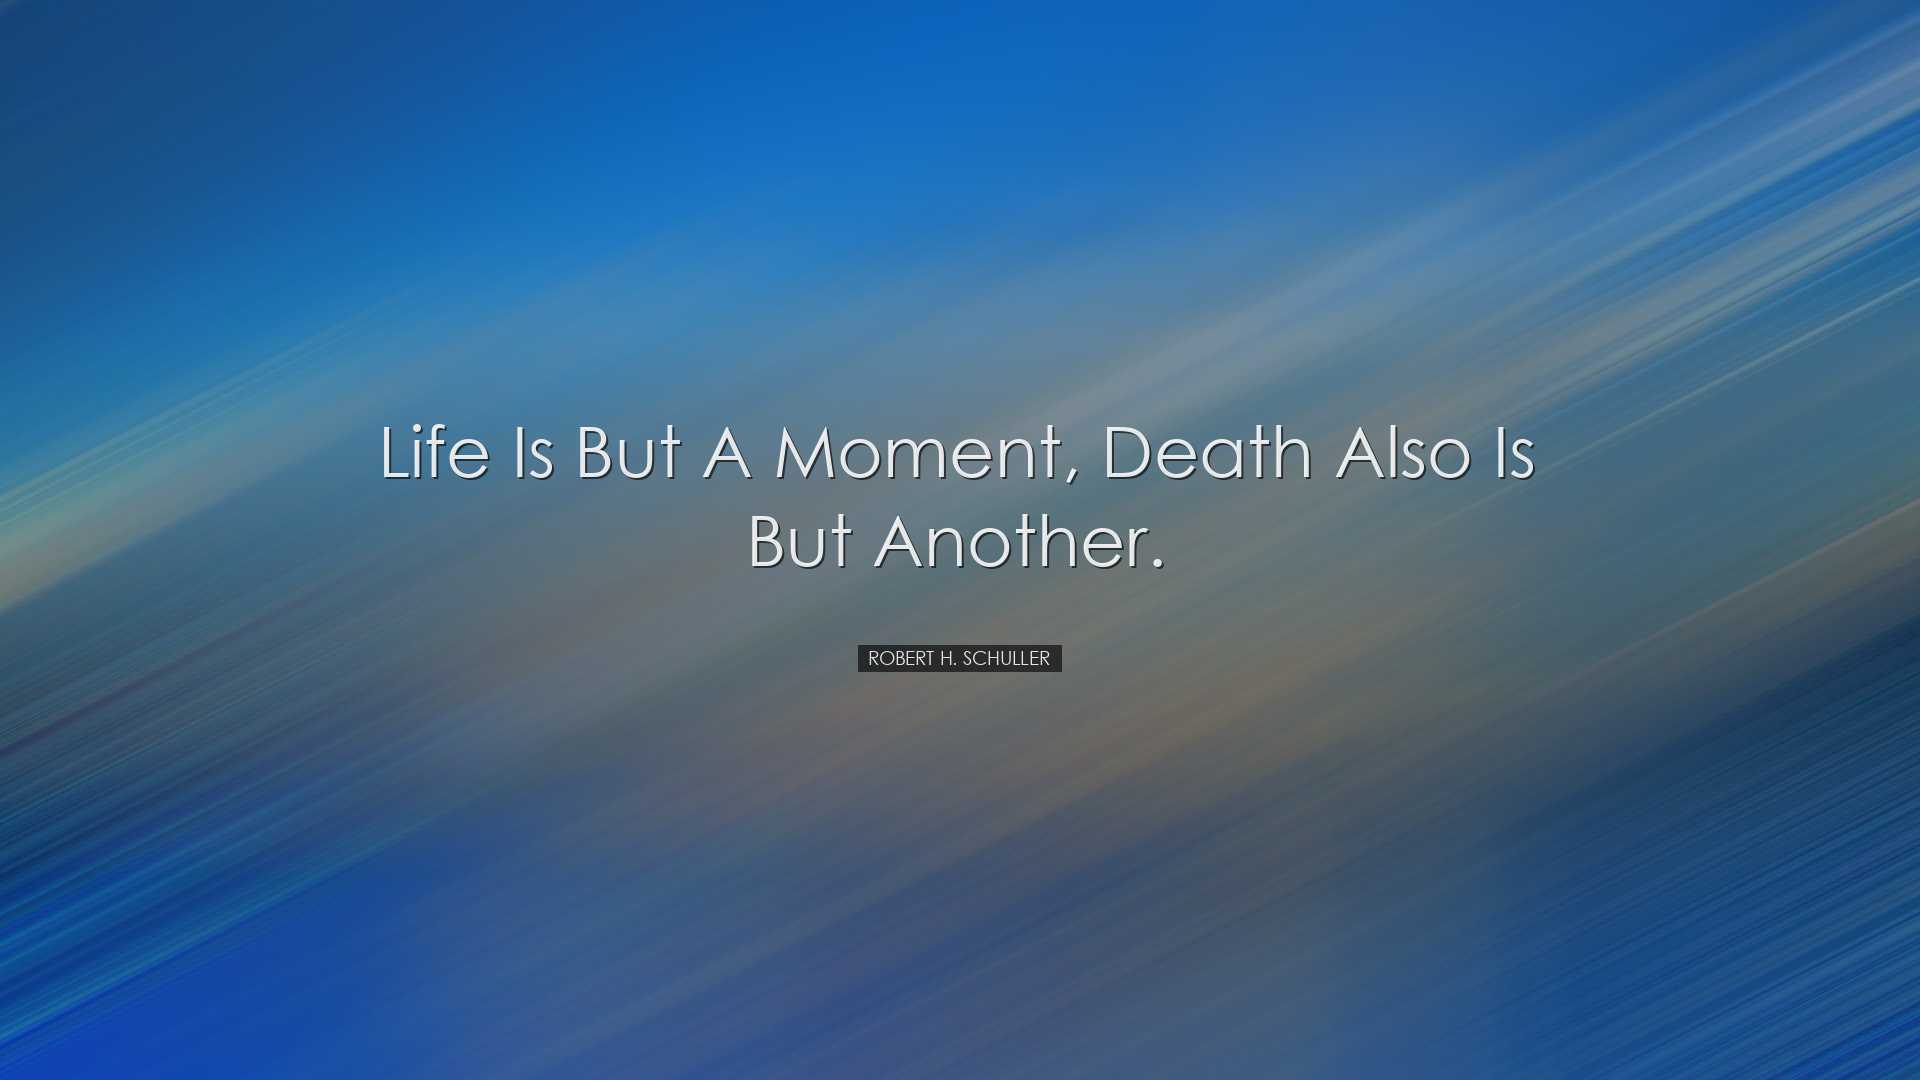 Life is but a moment, death also is but another. - Robert H. Schul